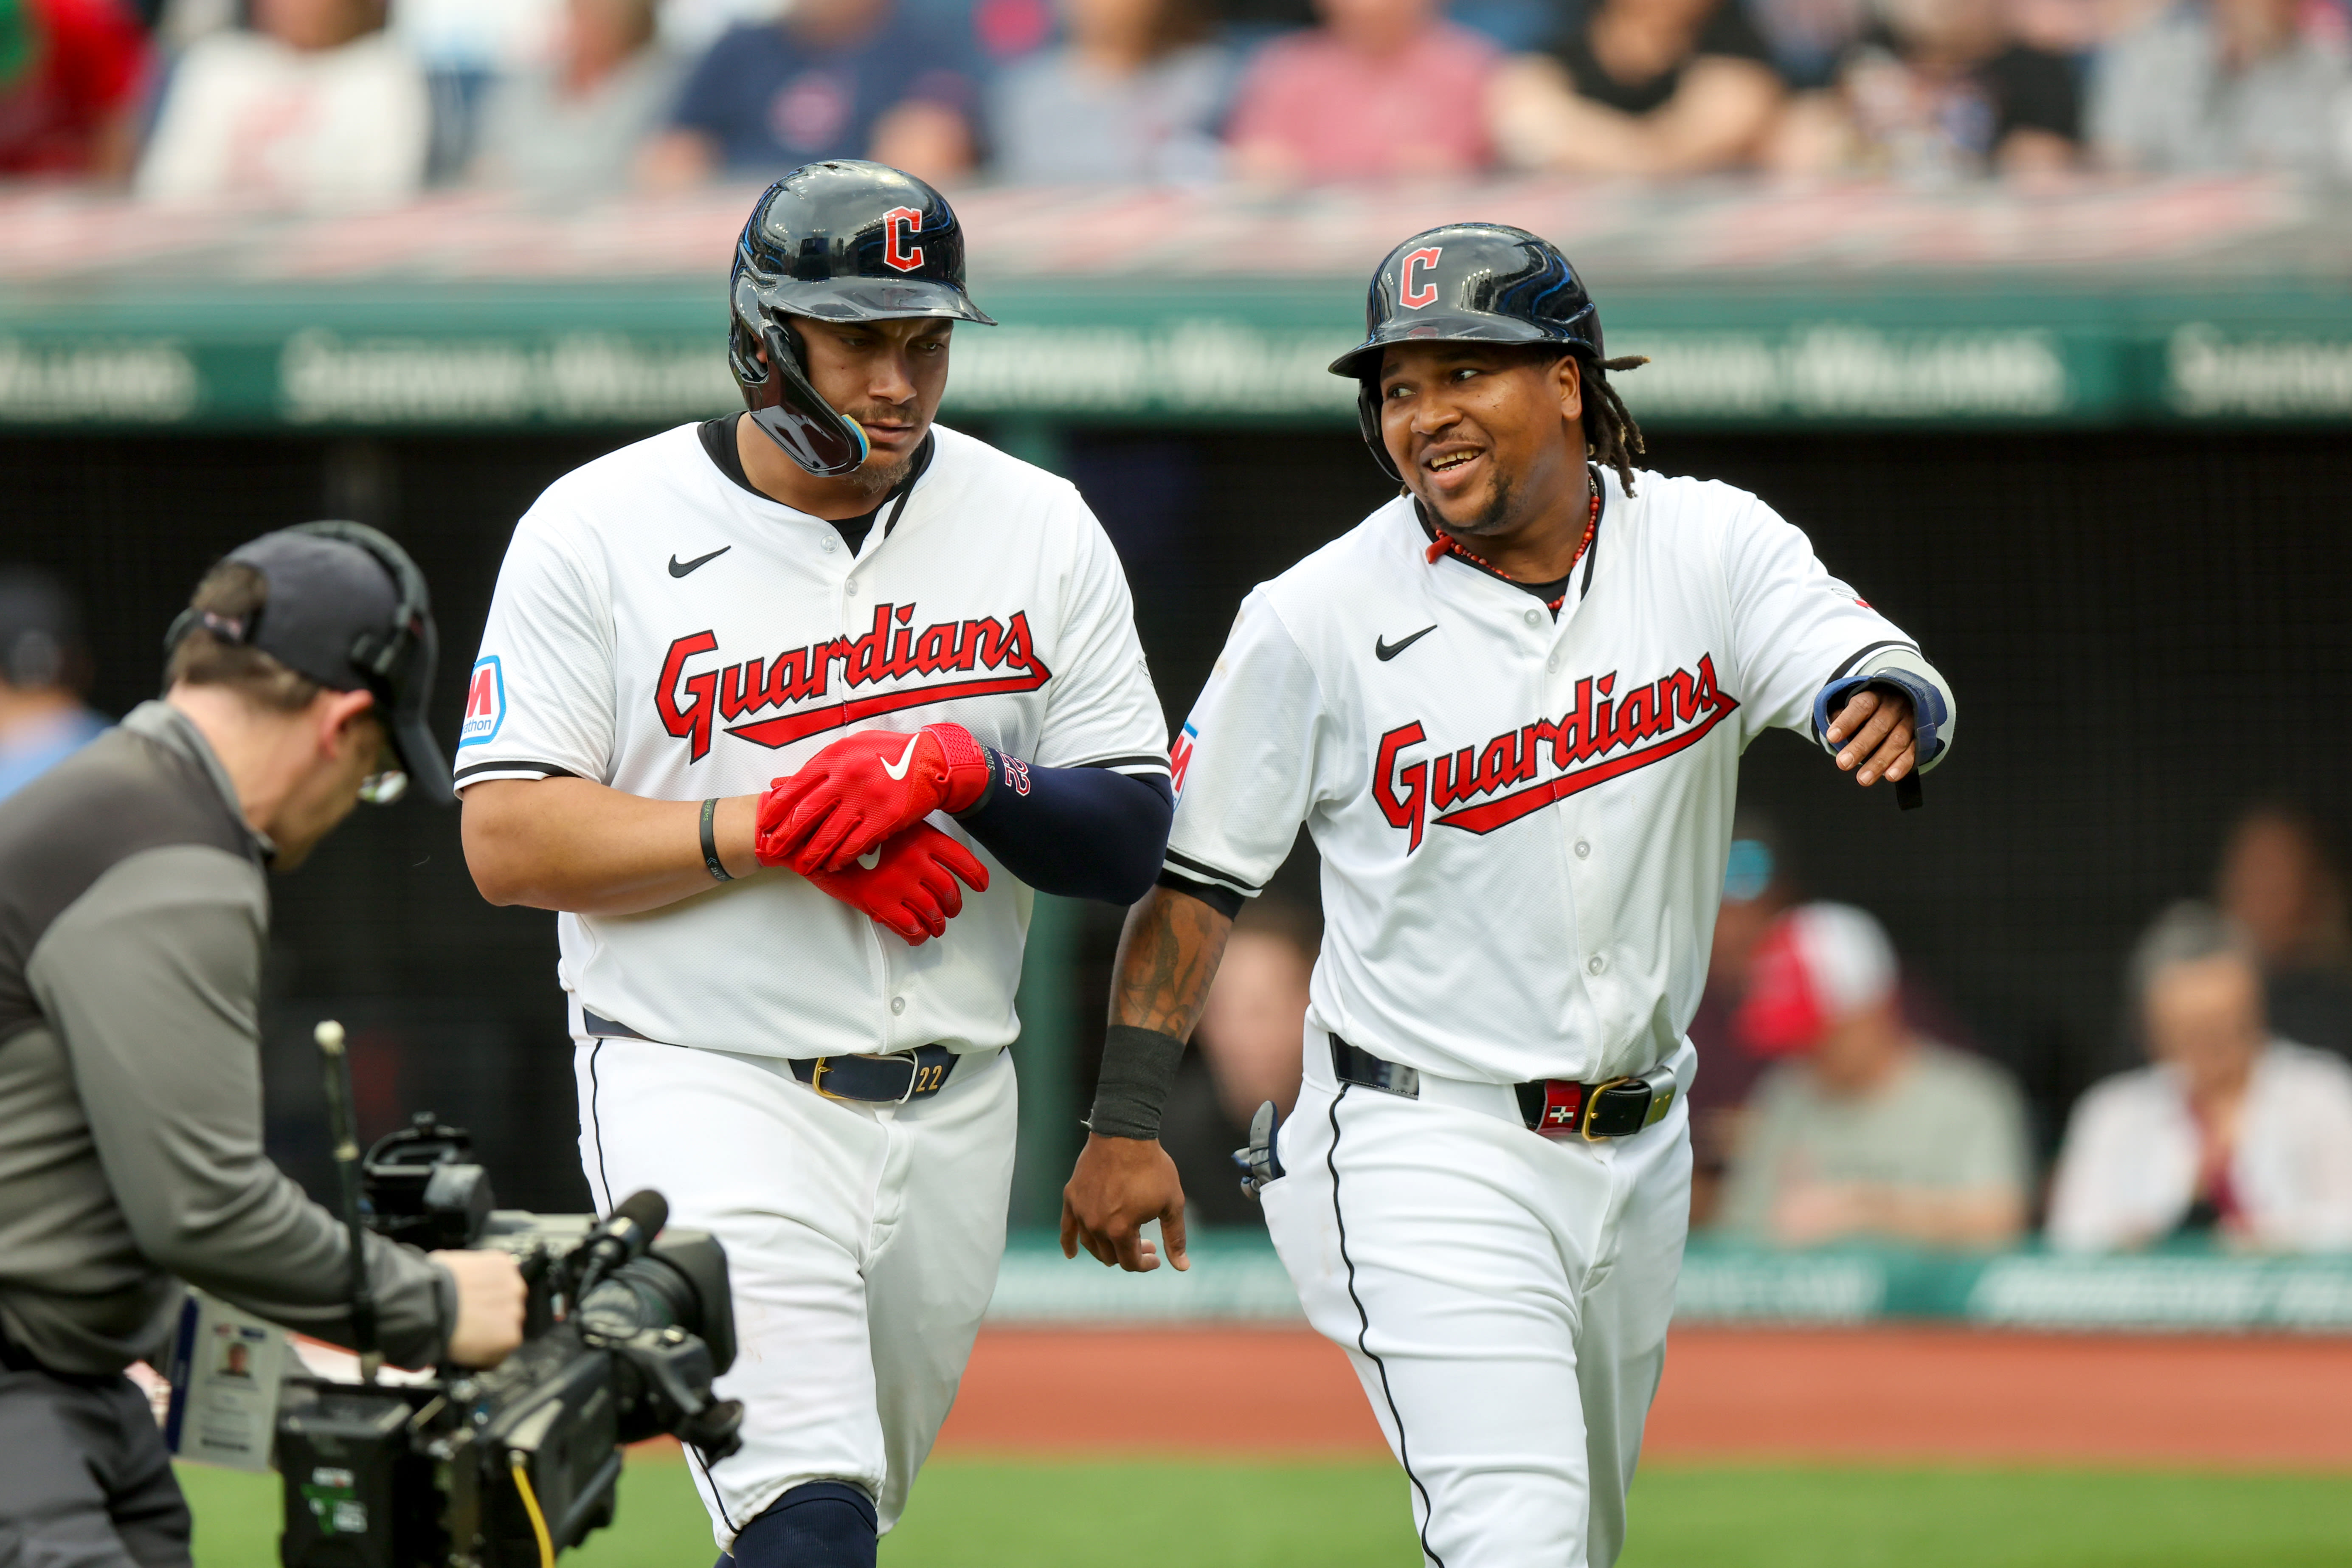 Guardians may be MLB's biggest surprise team for a surprising reason